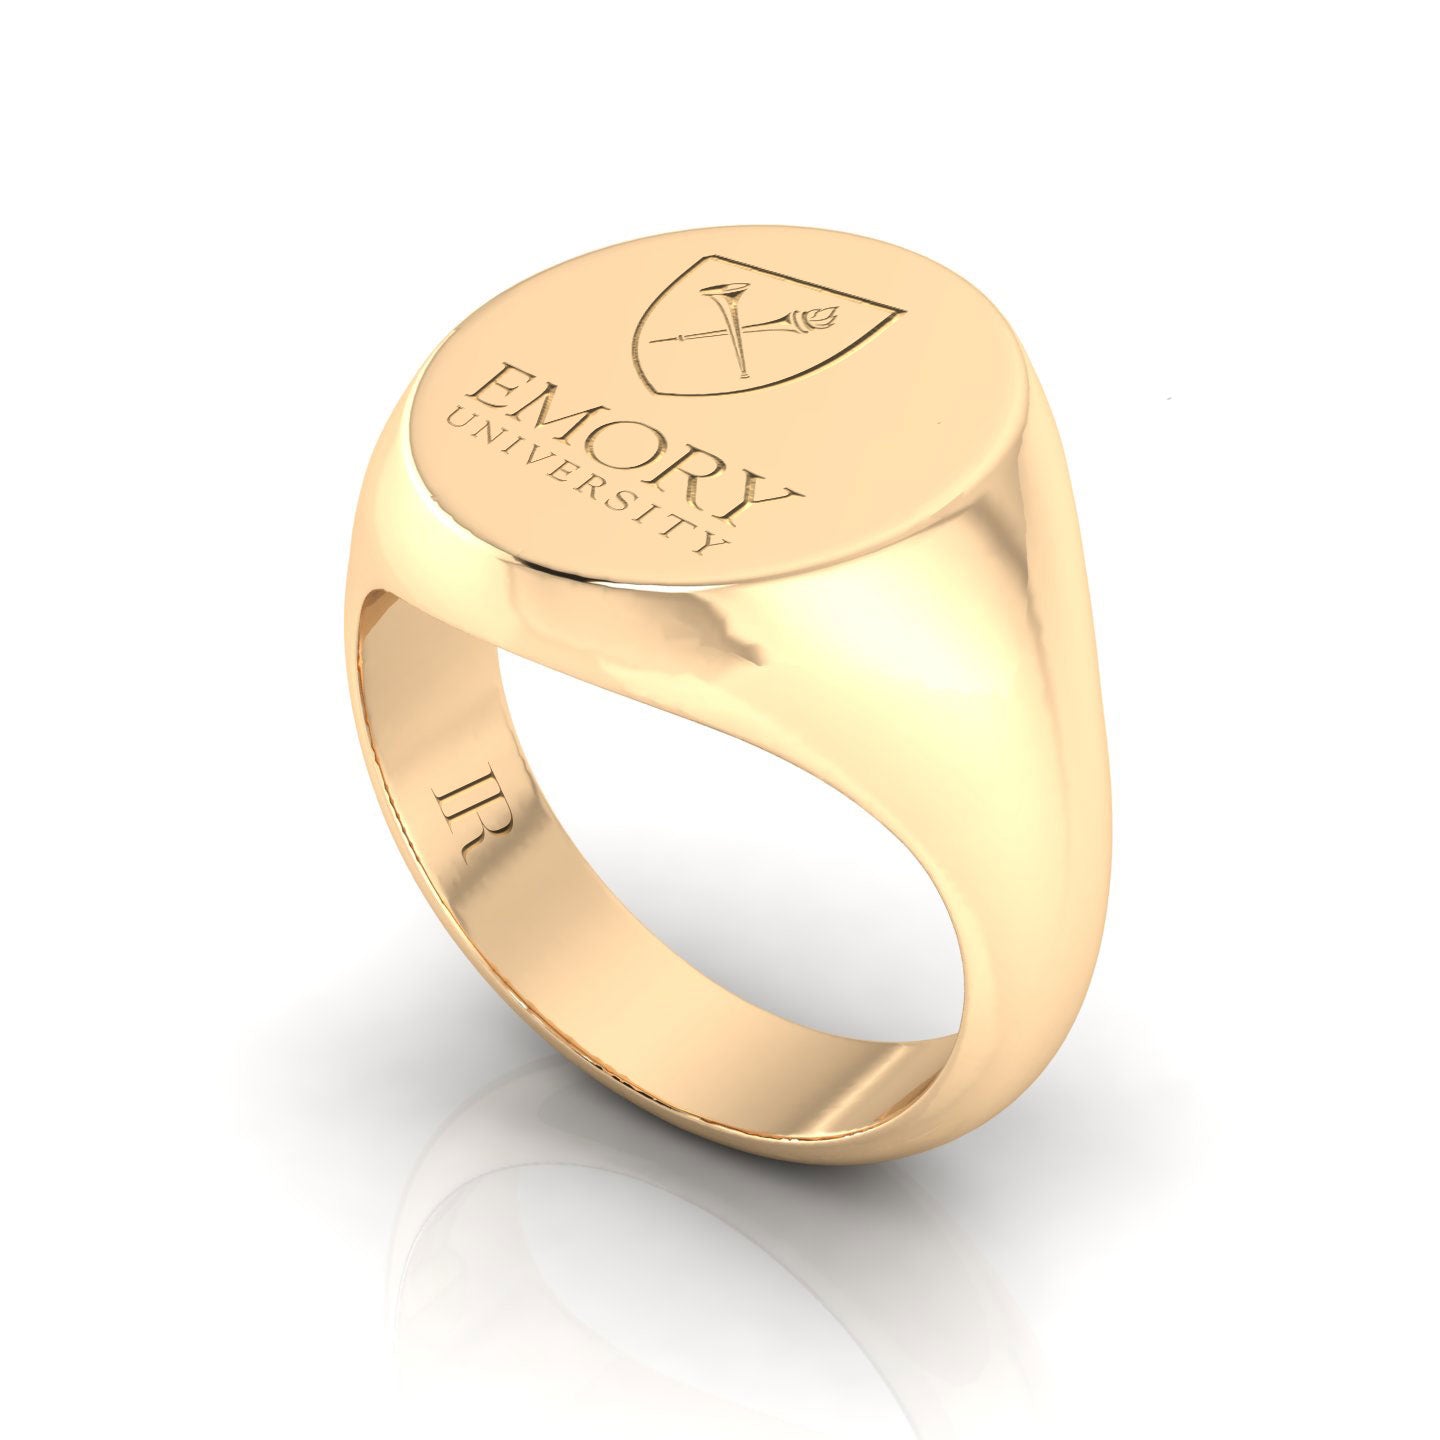 Side view of the Emory Ivy Signet Class Ring in 14kt yellow gold, displaying the elegantly contoured design and detailed craftsmanship.